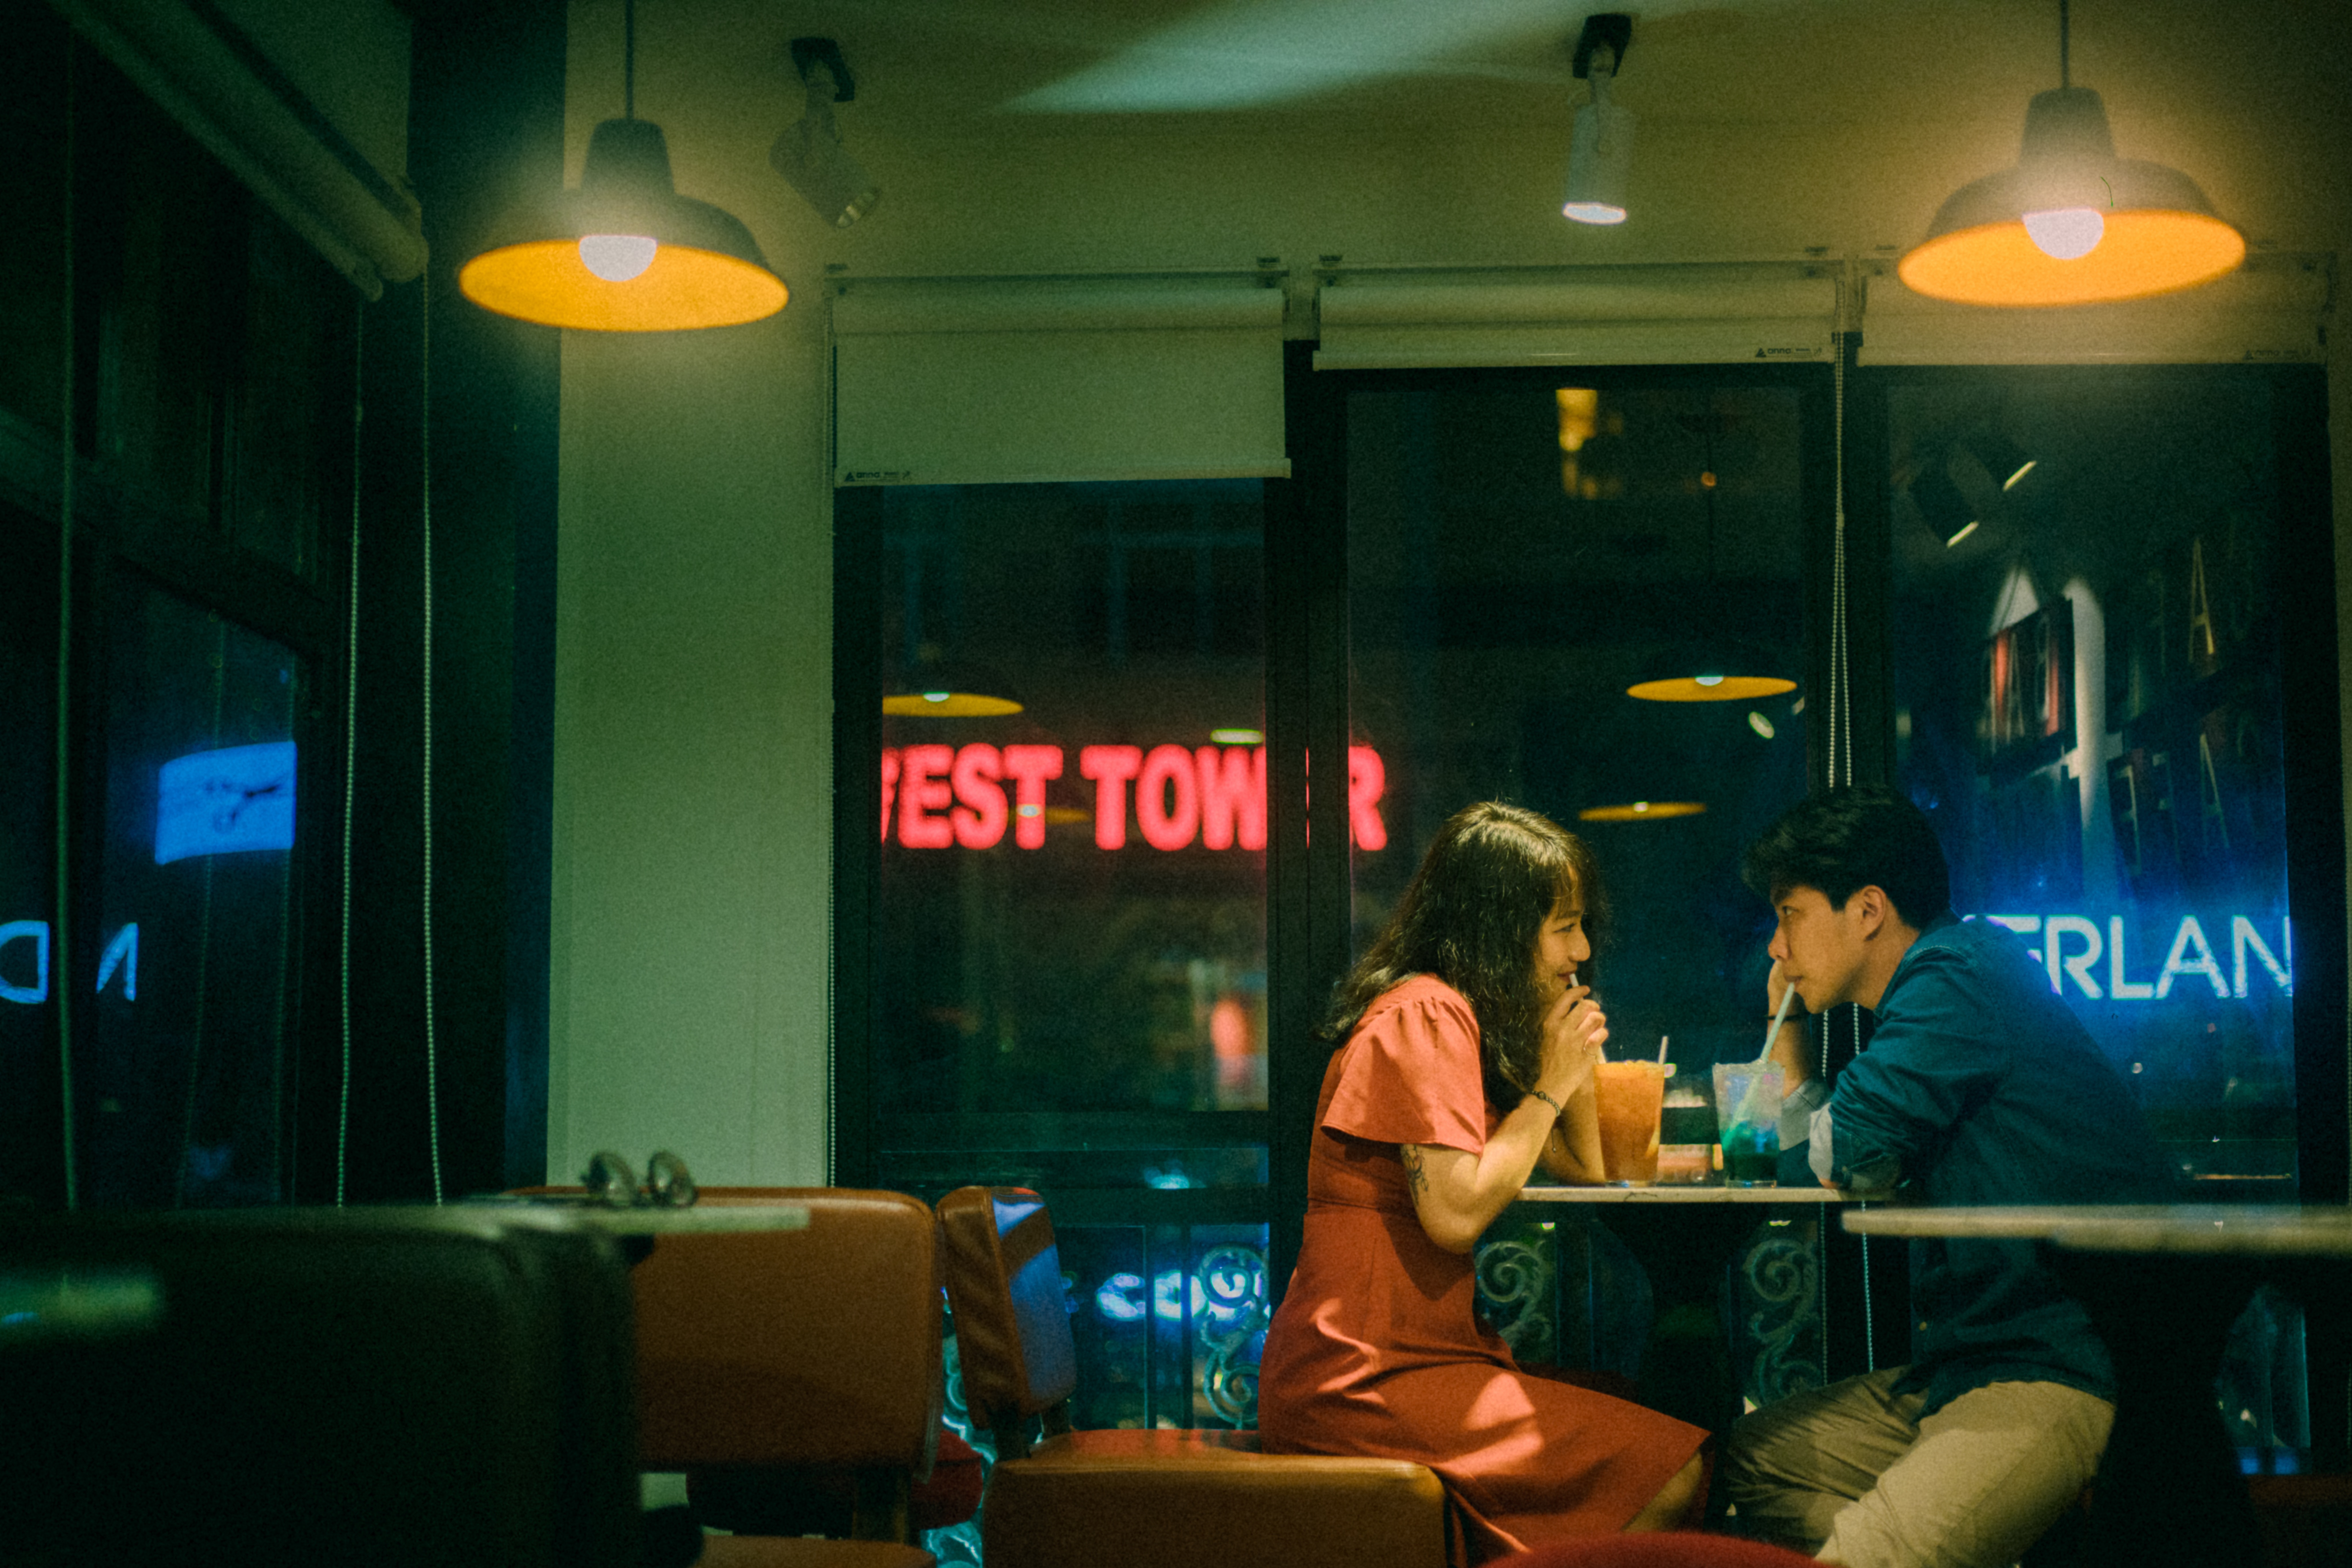 couple on a date at a diner